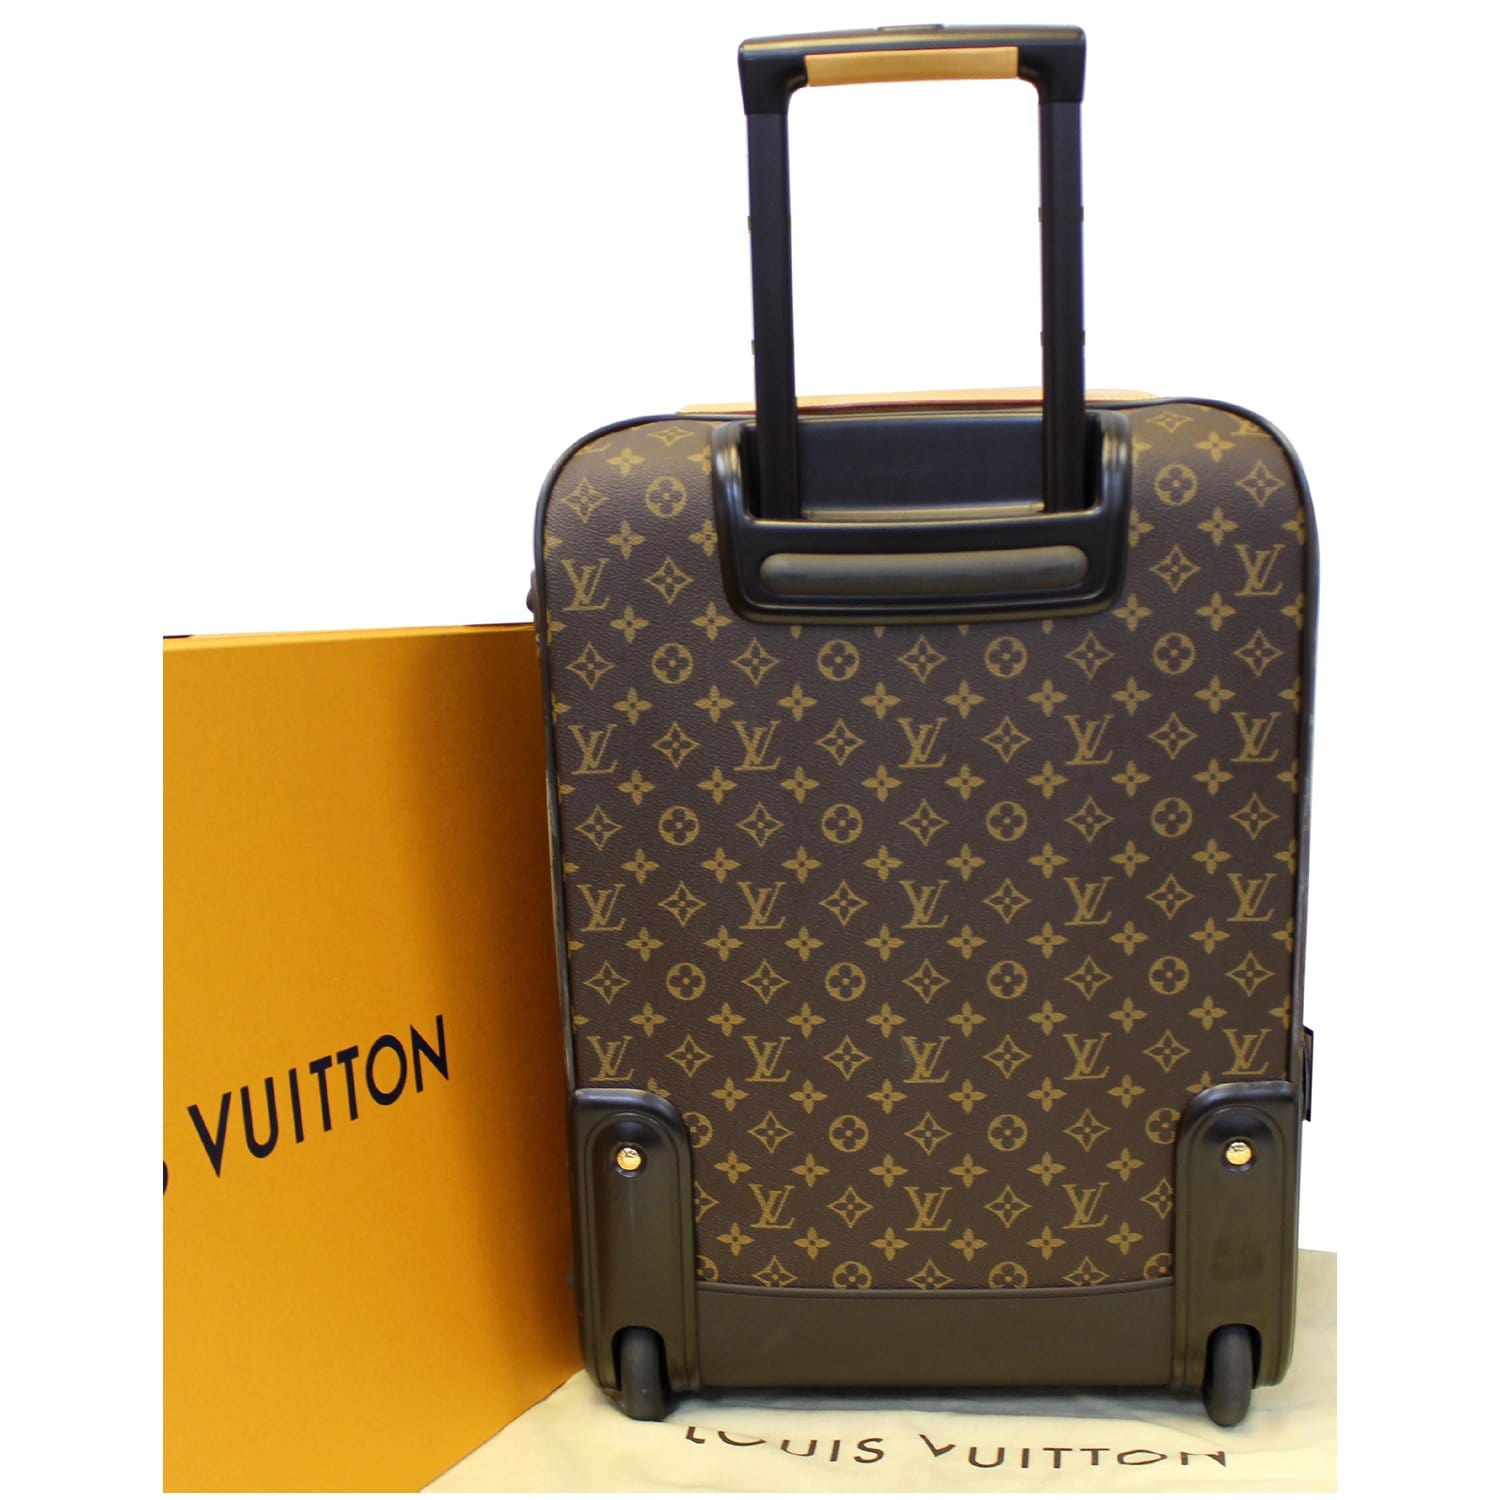 Louis Vuitton, Bags, Pgase Lgre 55 Hand Carry Luggage